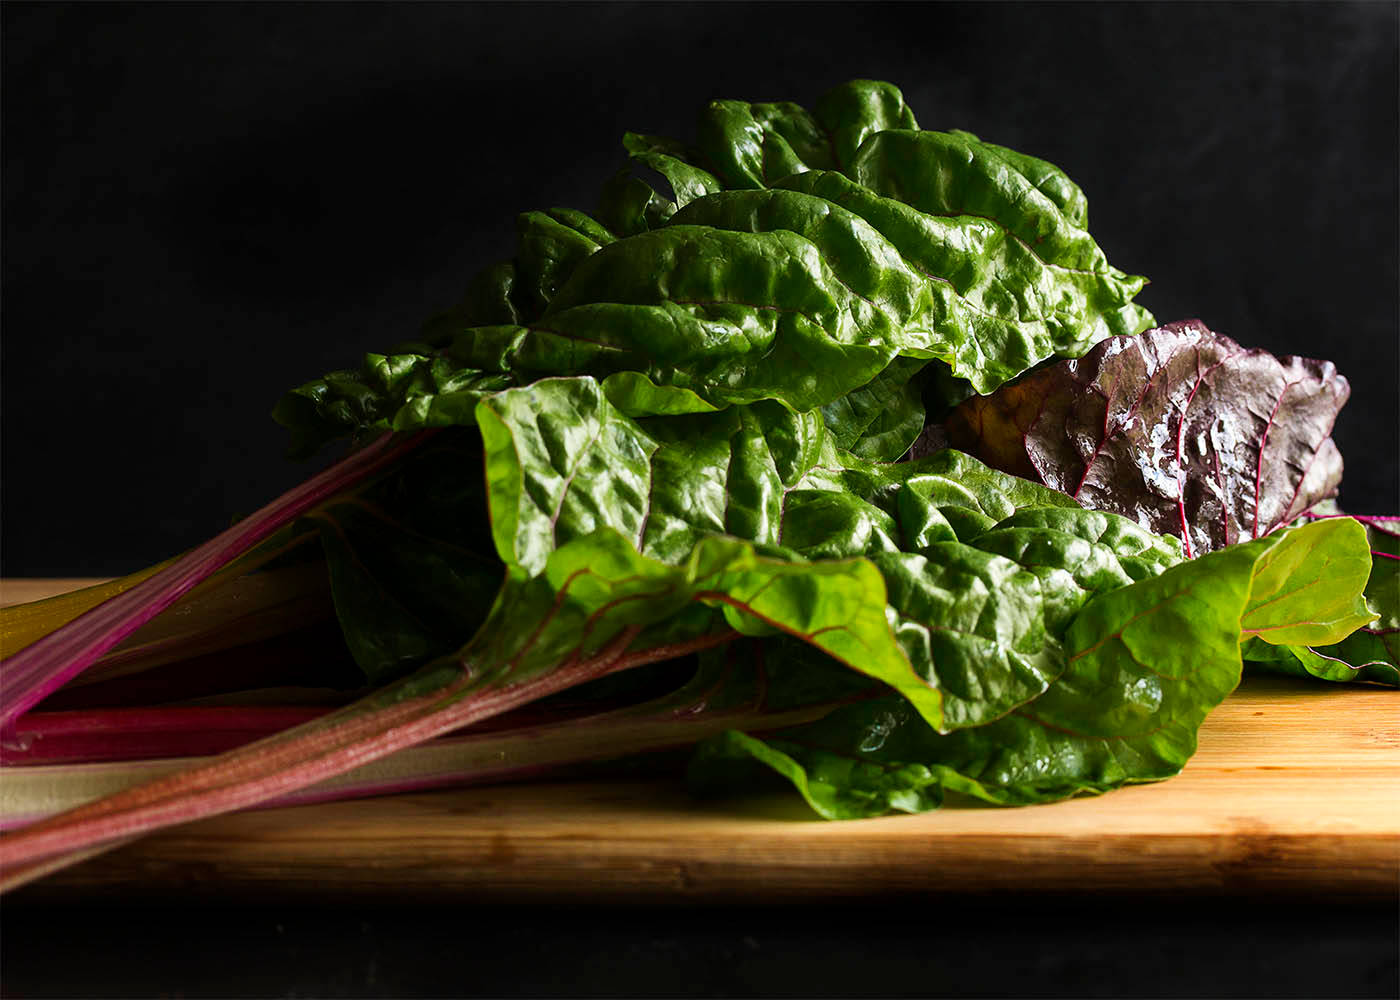 Colored Swiss Chard Vegetable On Wooden Board Wallpaper